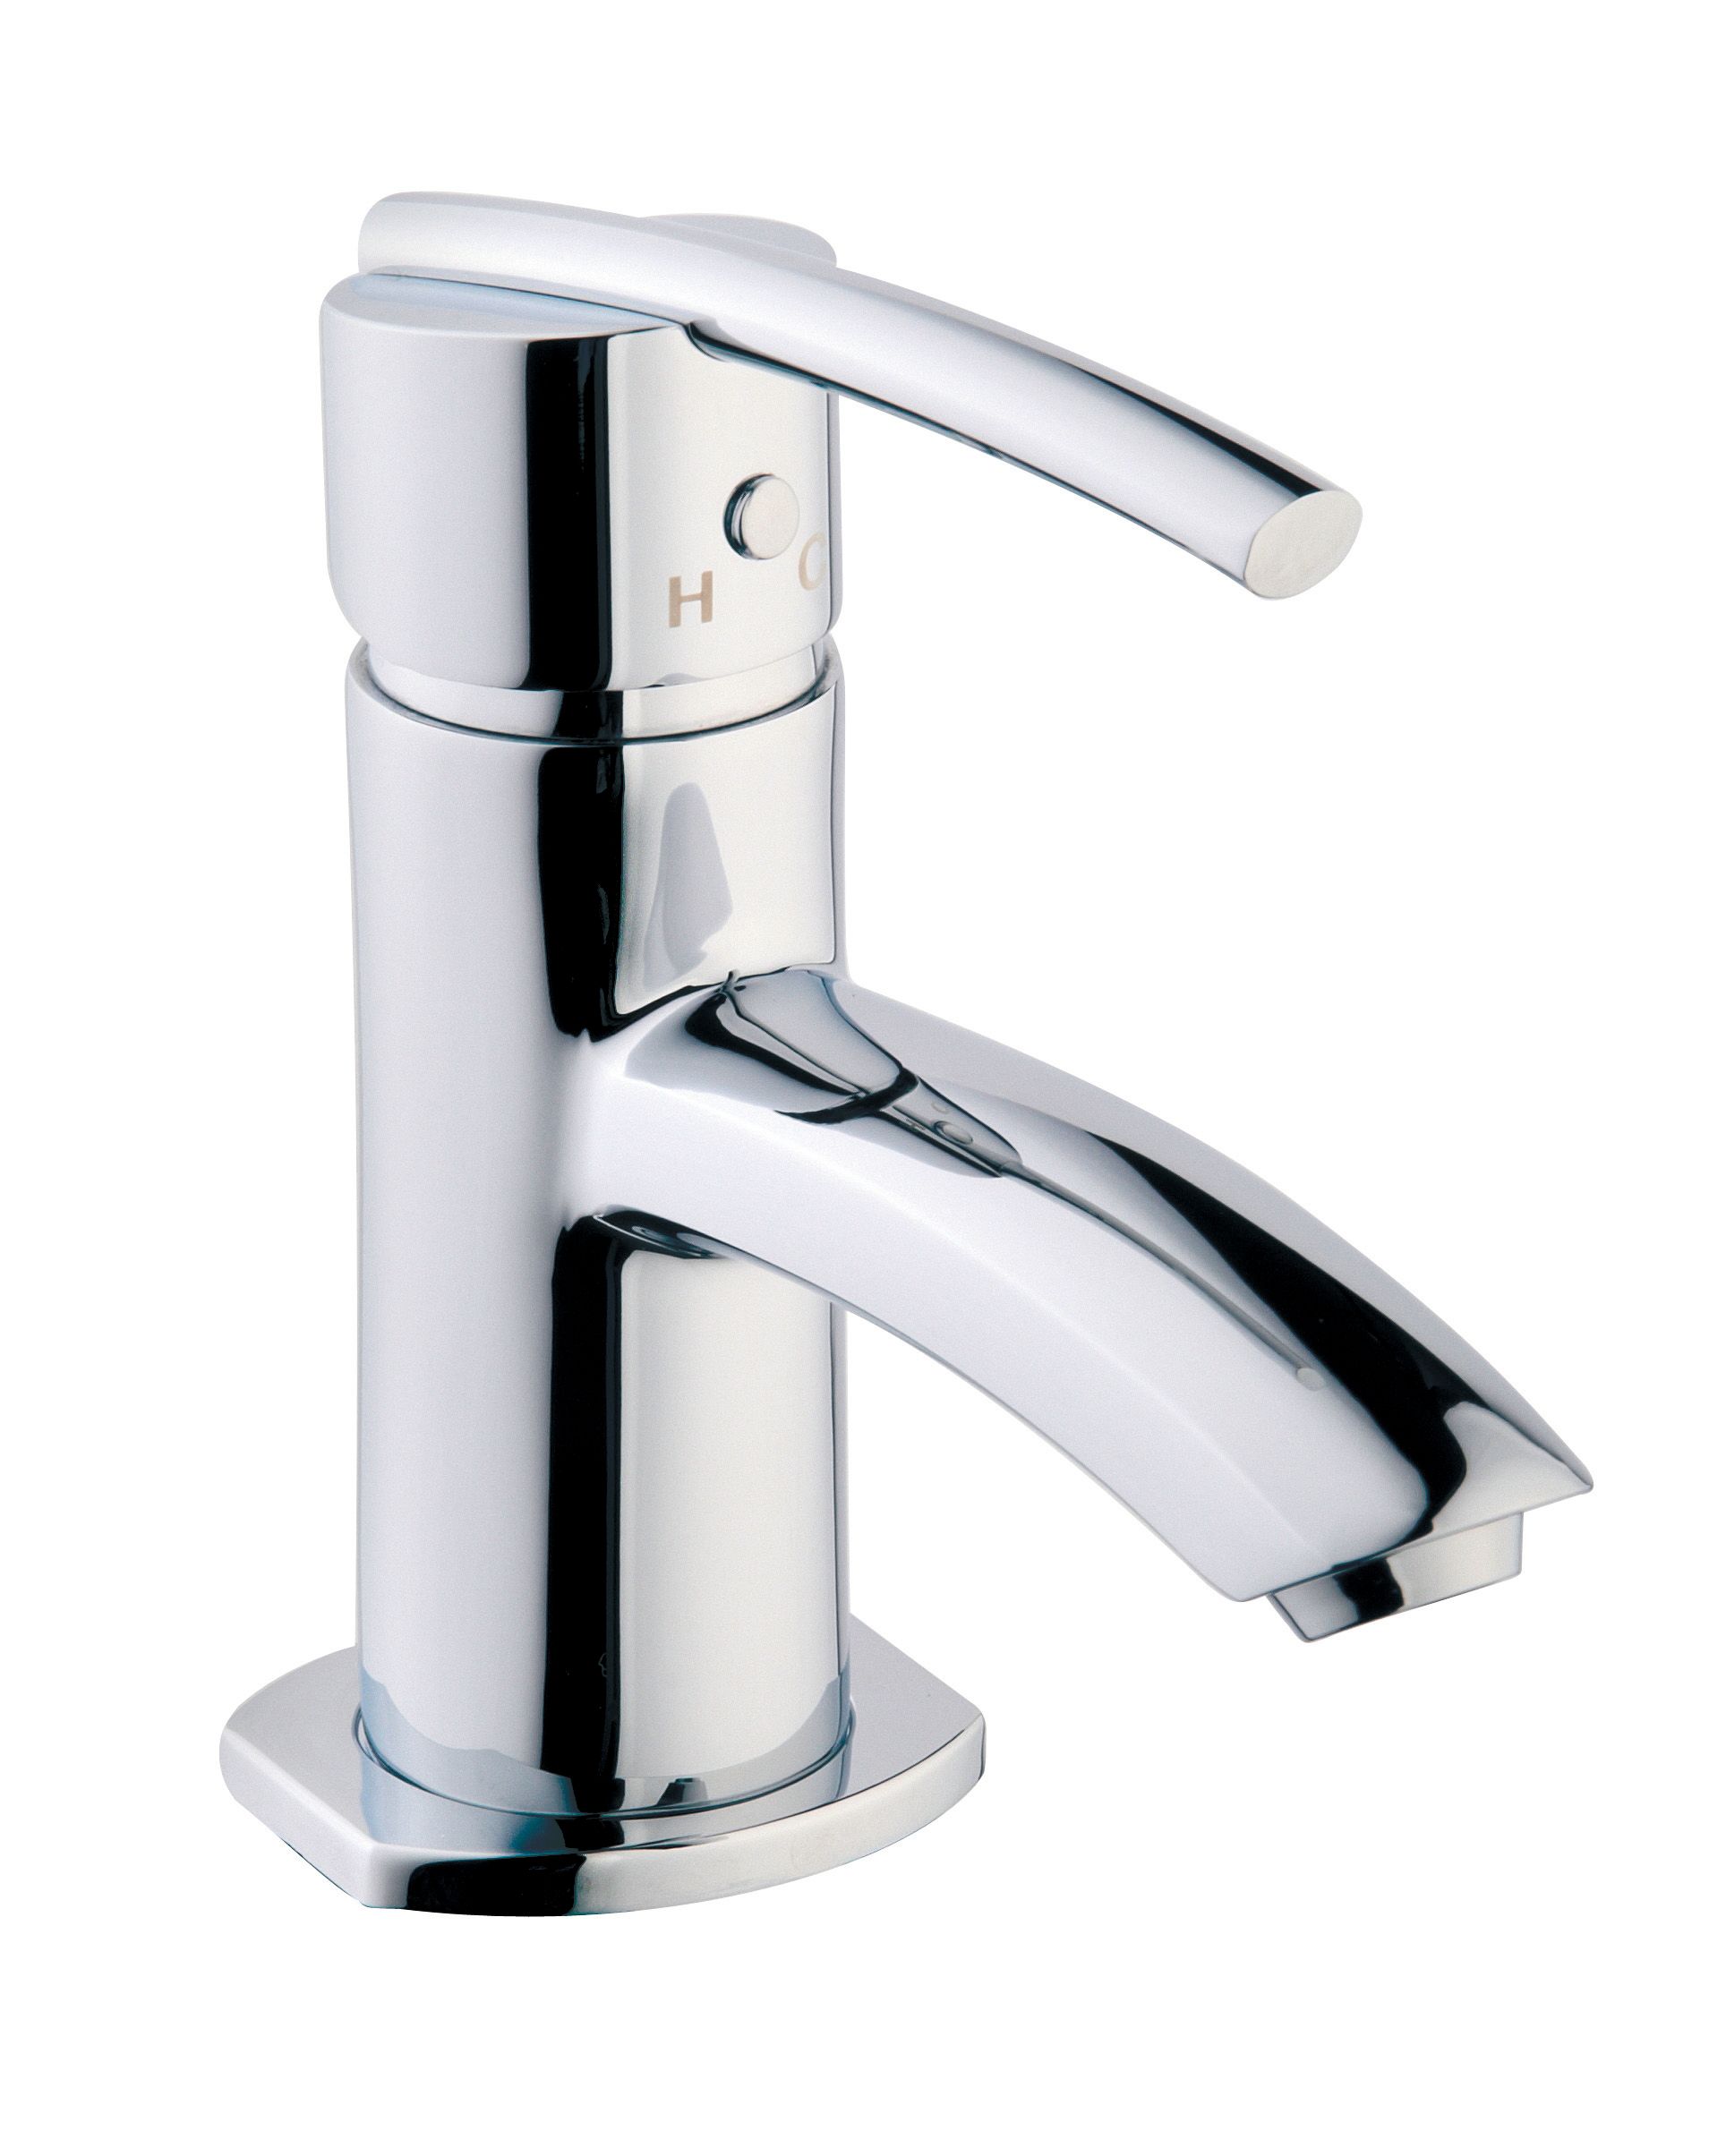 Image of Wickes Versaille Compact Basin Mixer Tap - Chrome